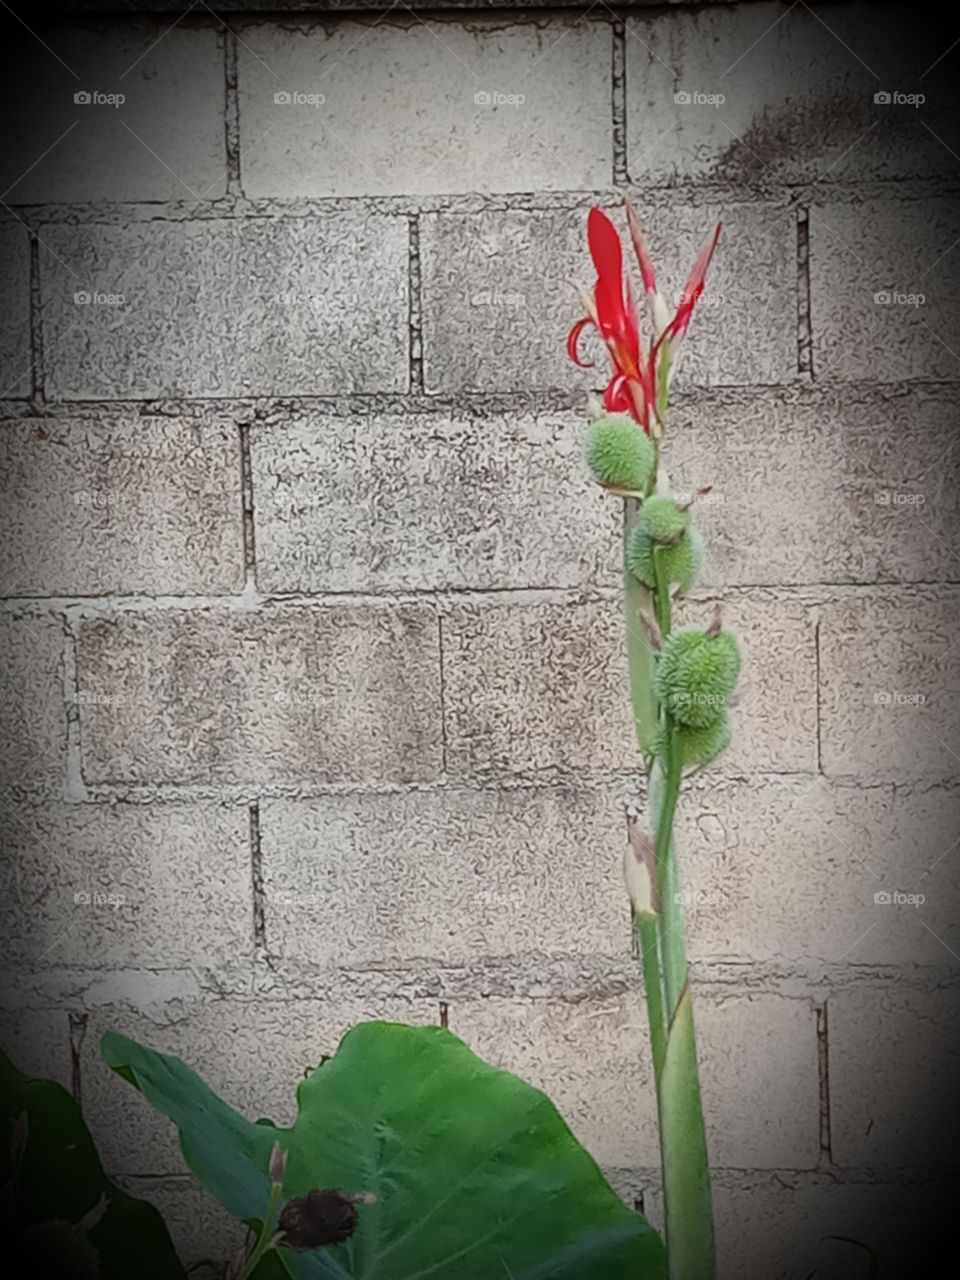 red canna lilly